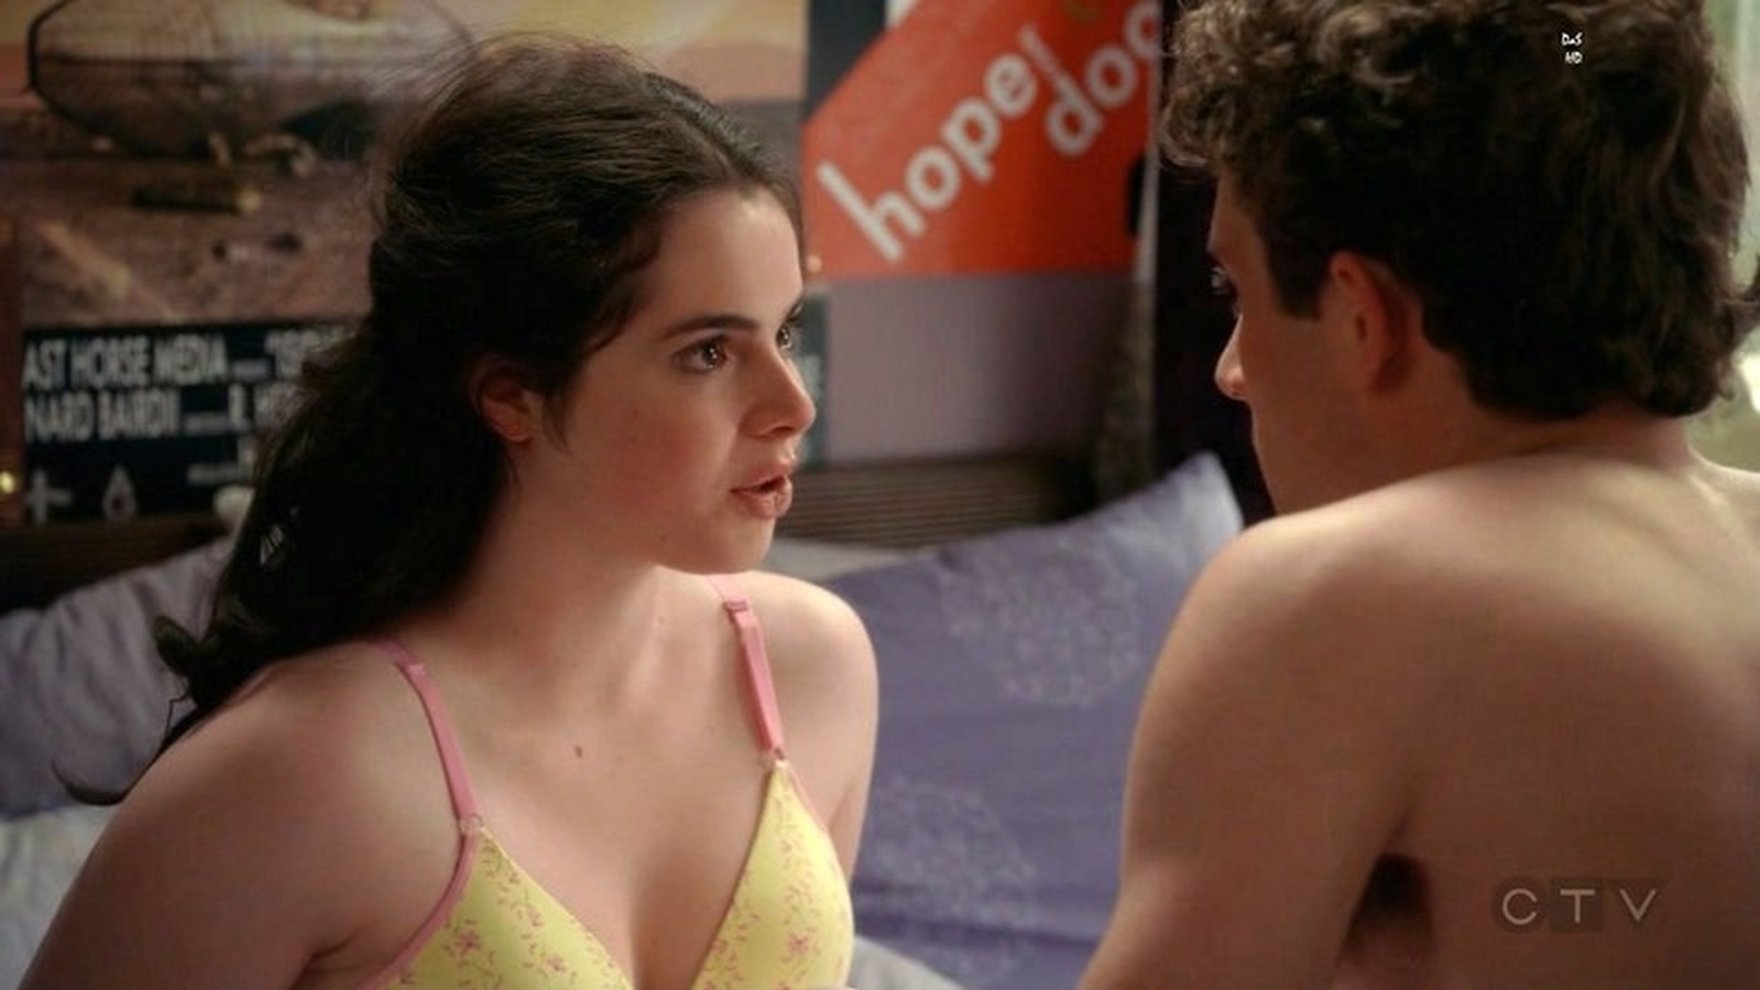 Naked Vanessa Marano In Scoundrels porn images naked vanessa marano in sc.....